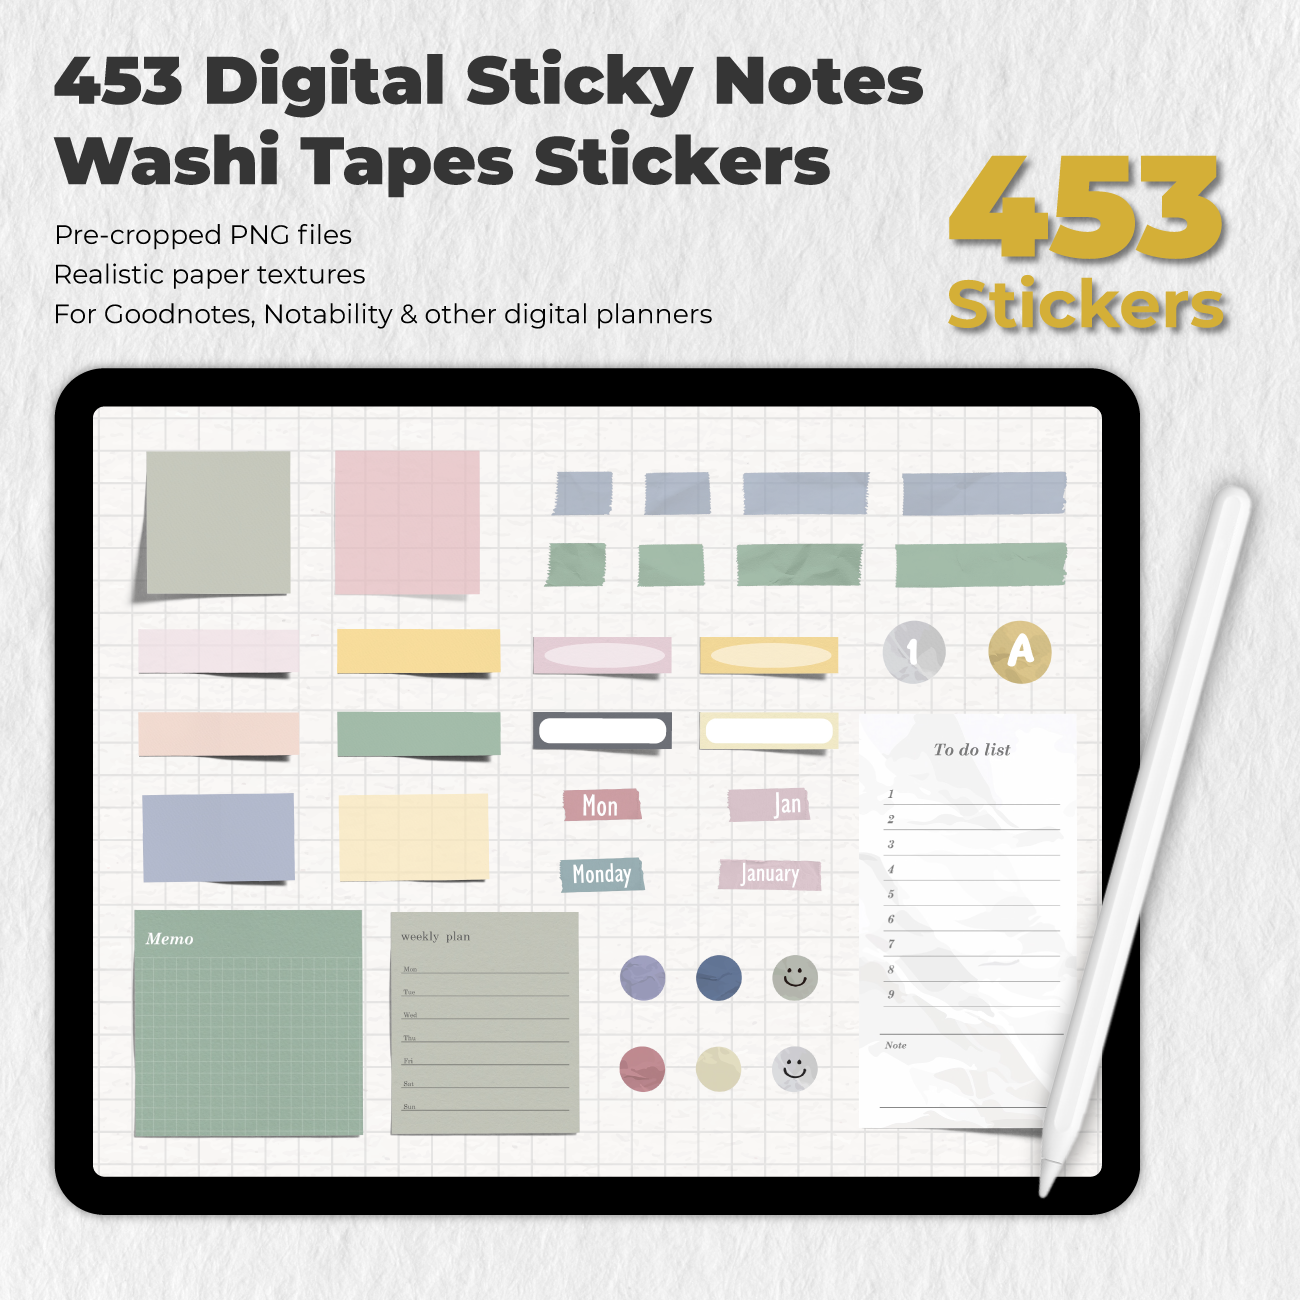 453 Digital Sticky Notes Washi Tapes Stickers For Digital Planner - Stationery Pal